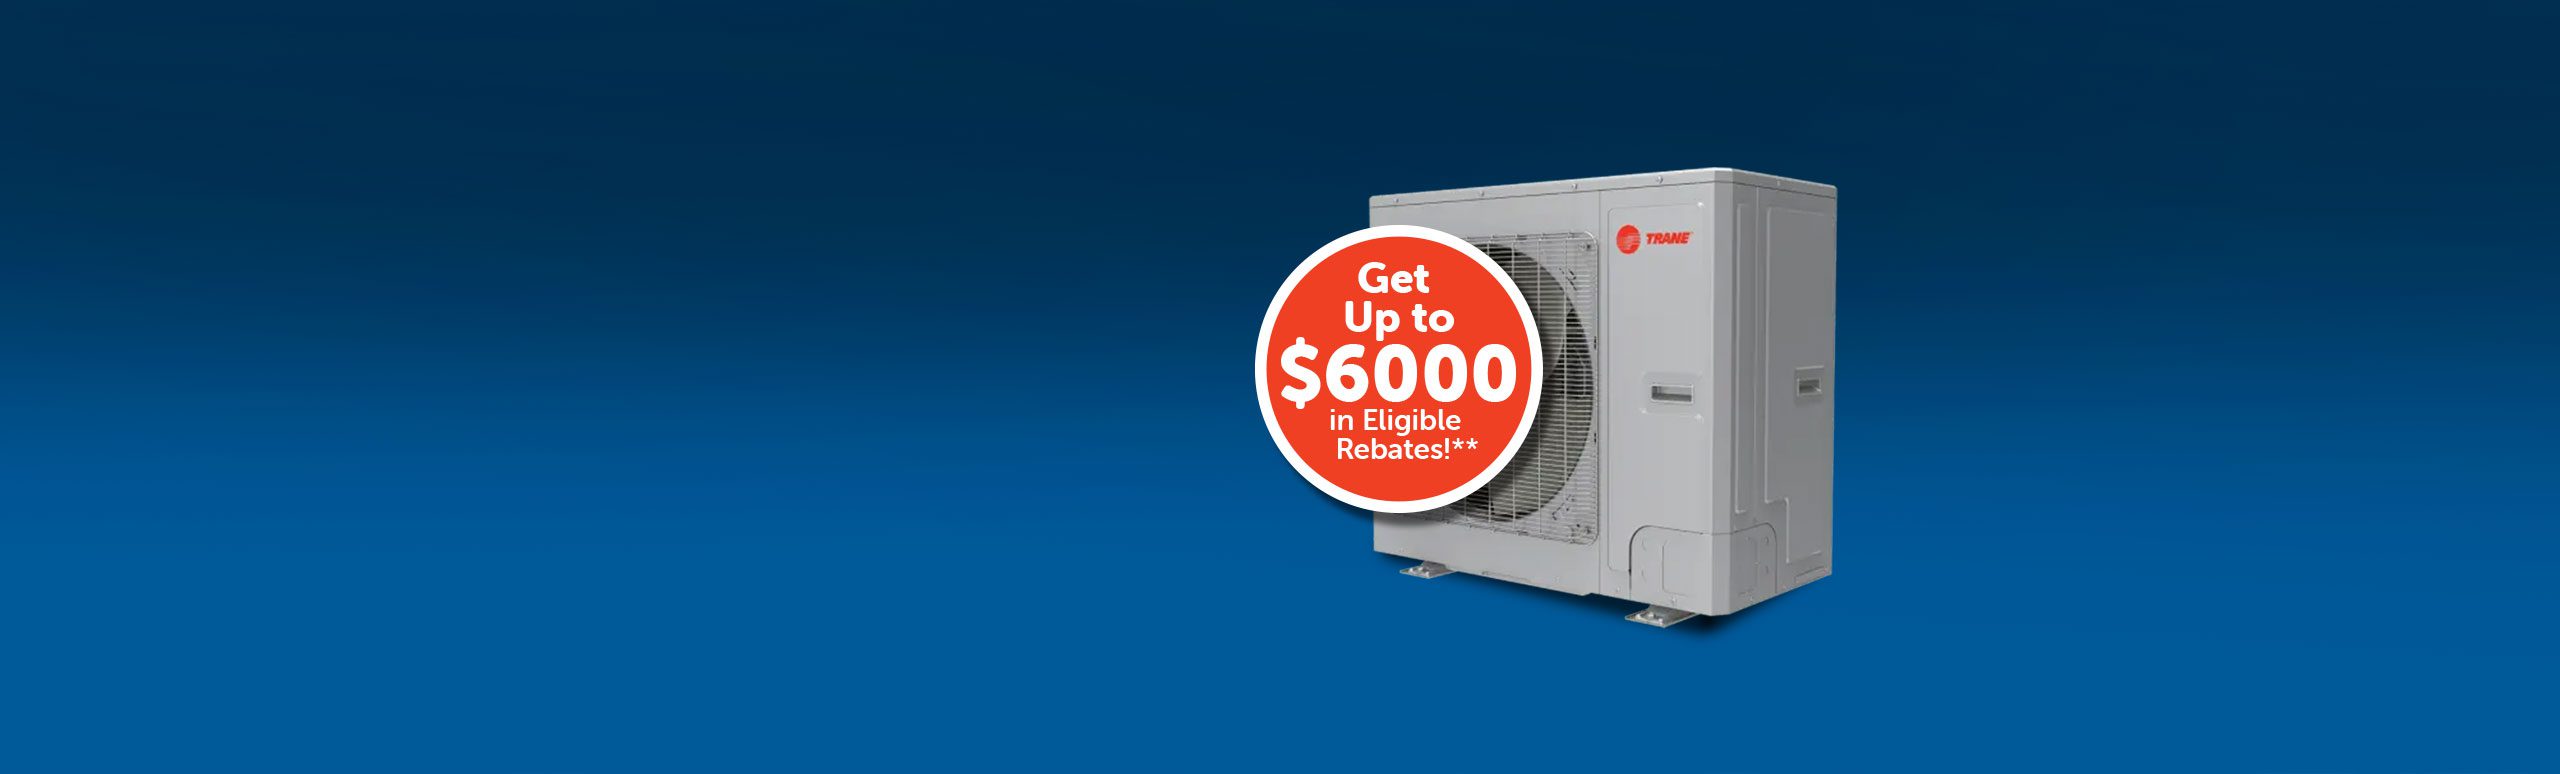 Trane Resolute Get up to $6000 on eligible rebate